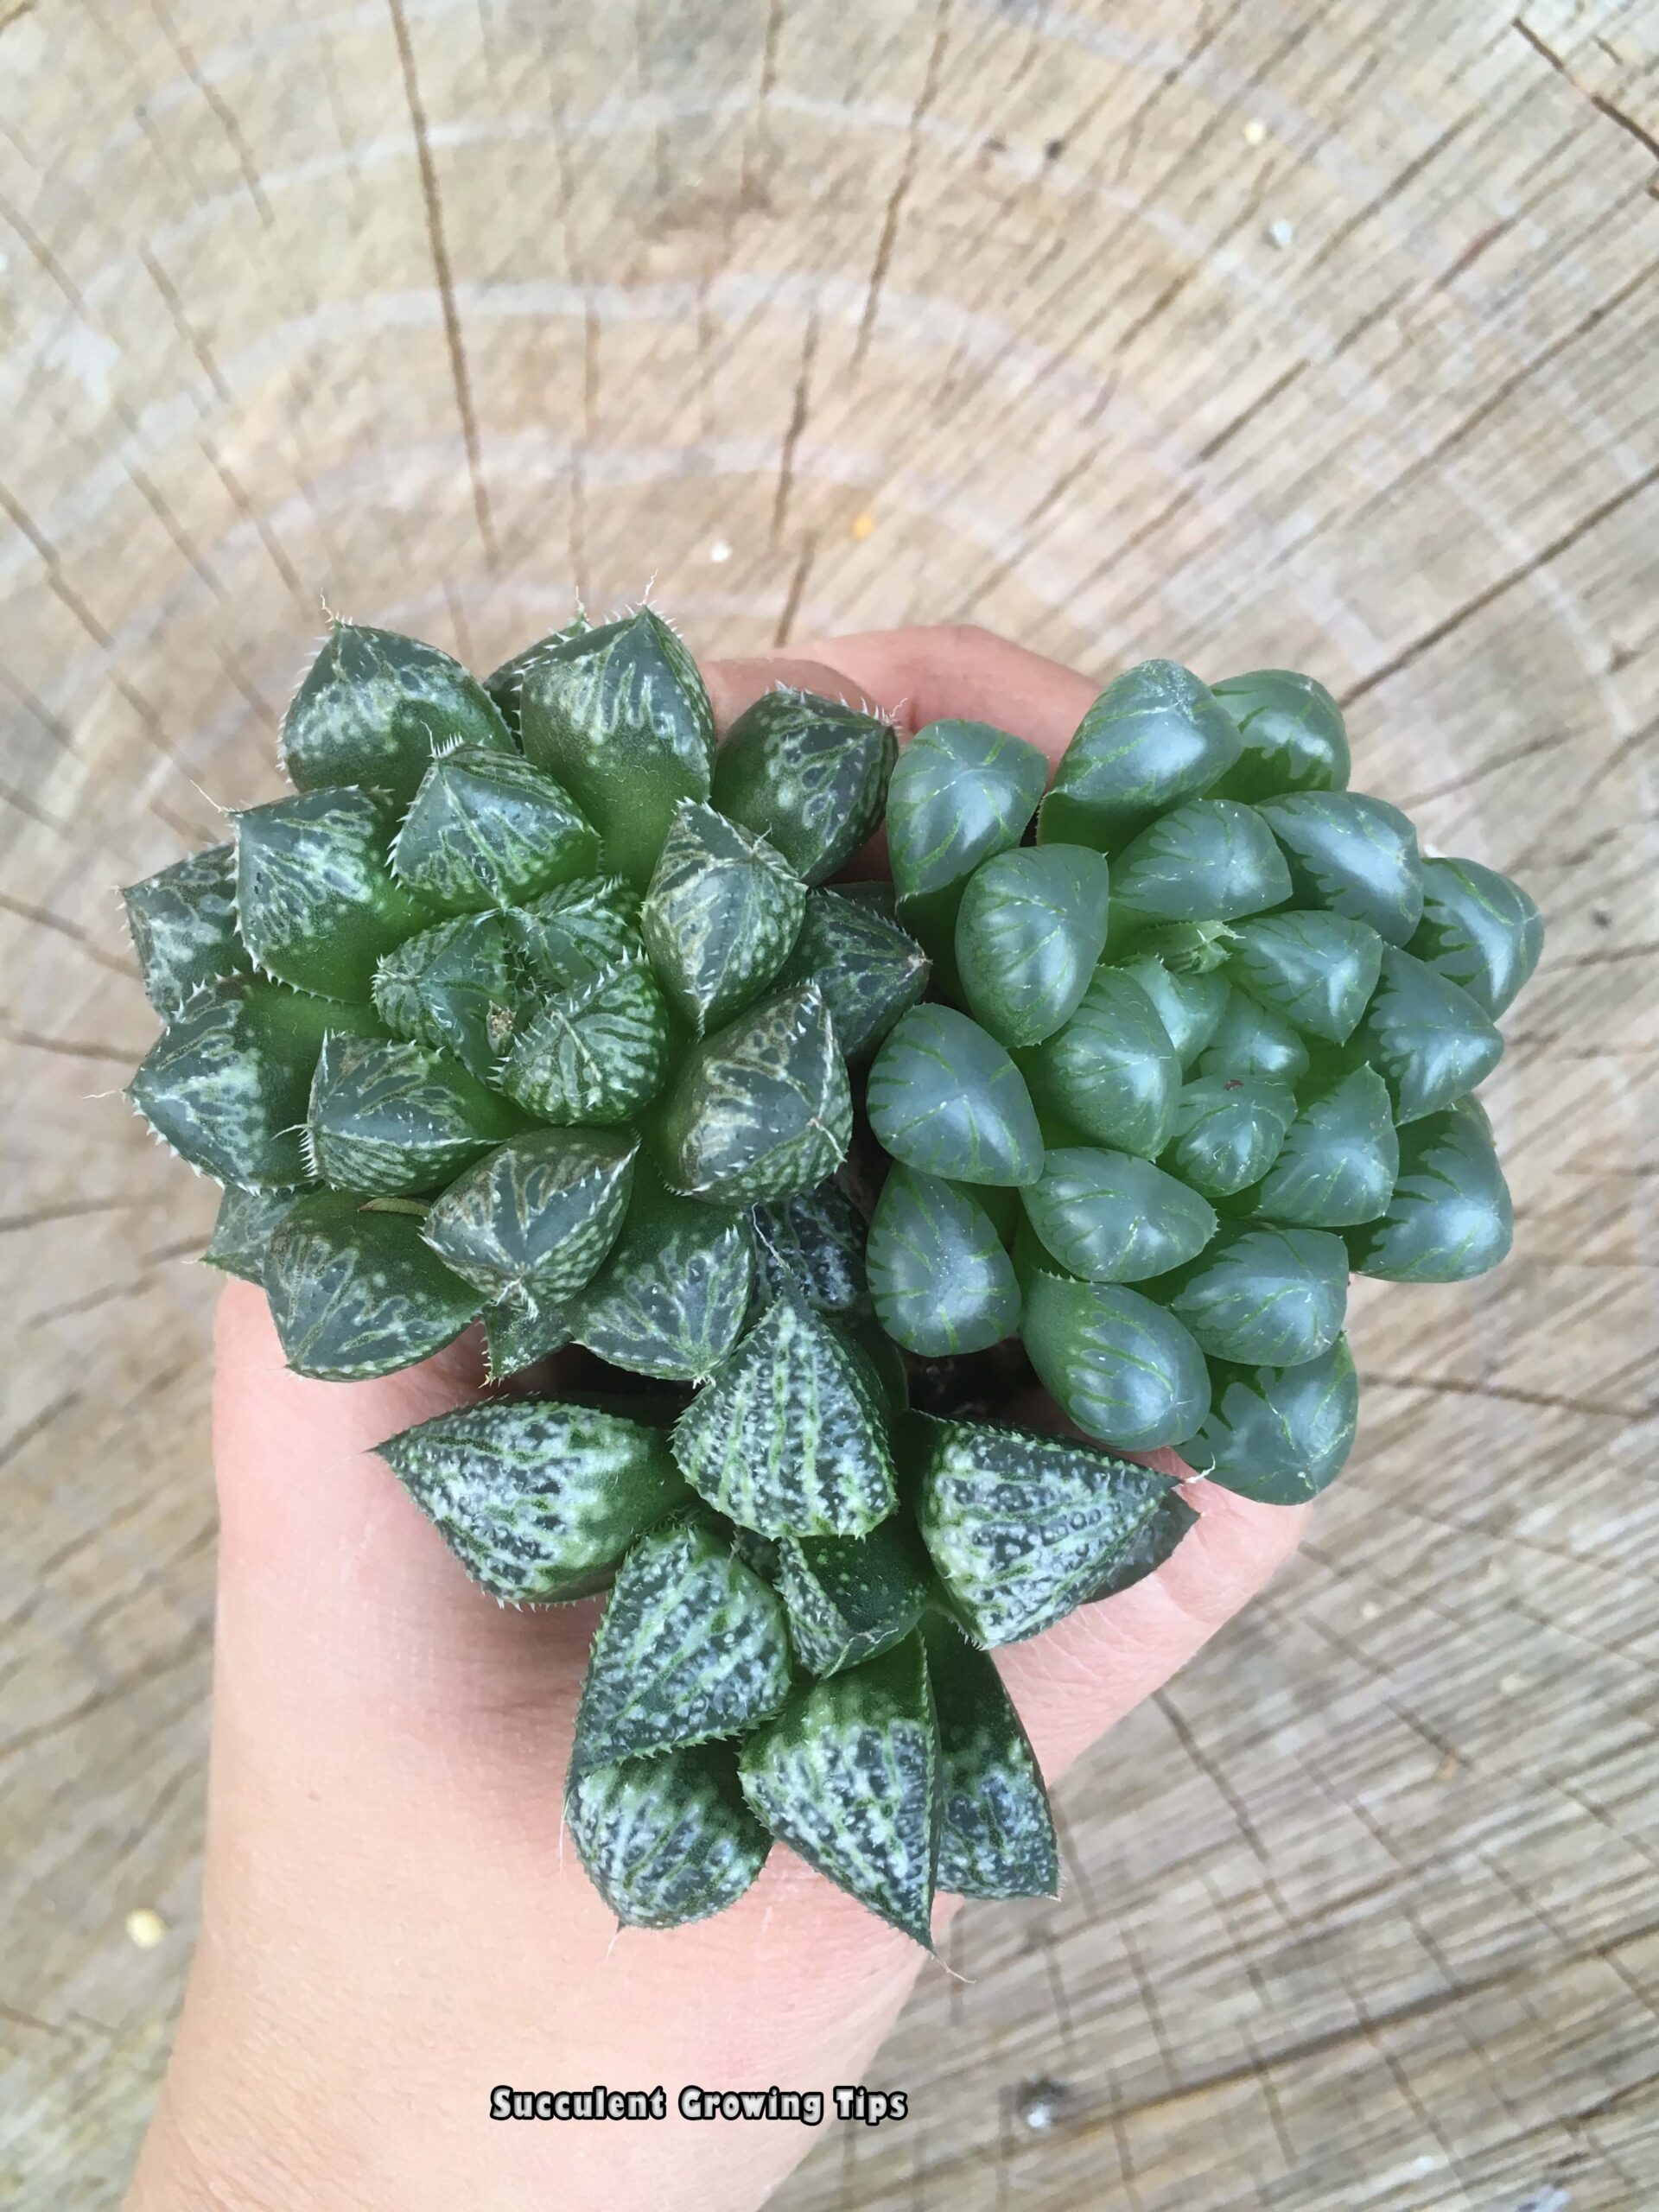 Why Does Haworthia Turn From Green To Brown?